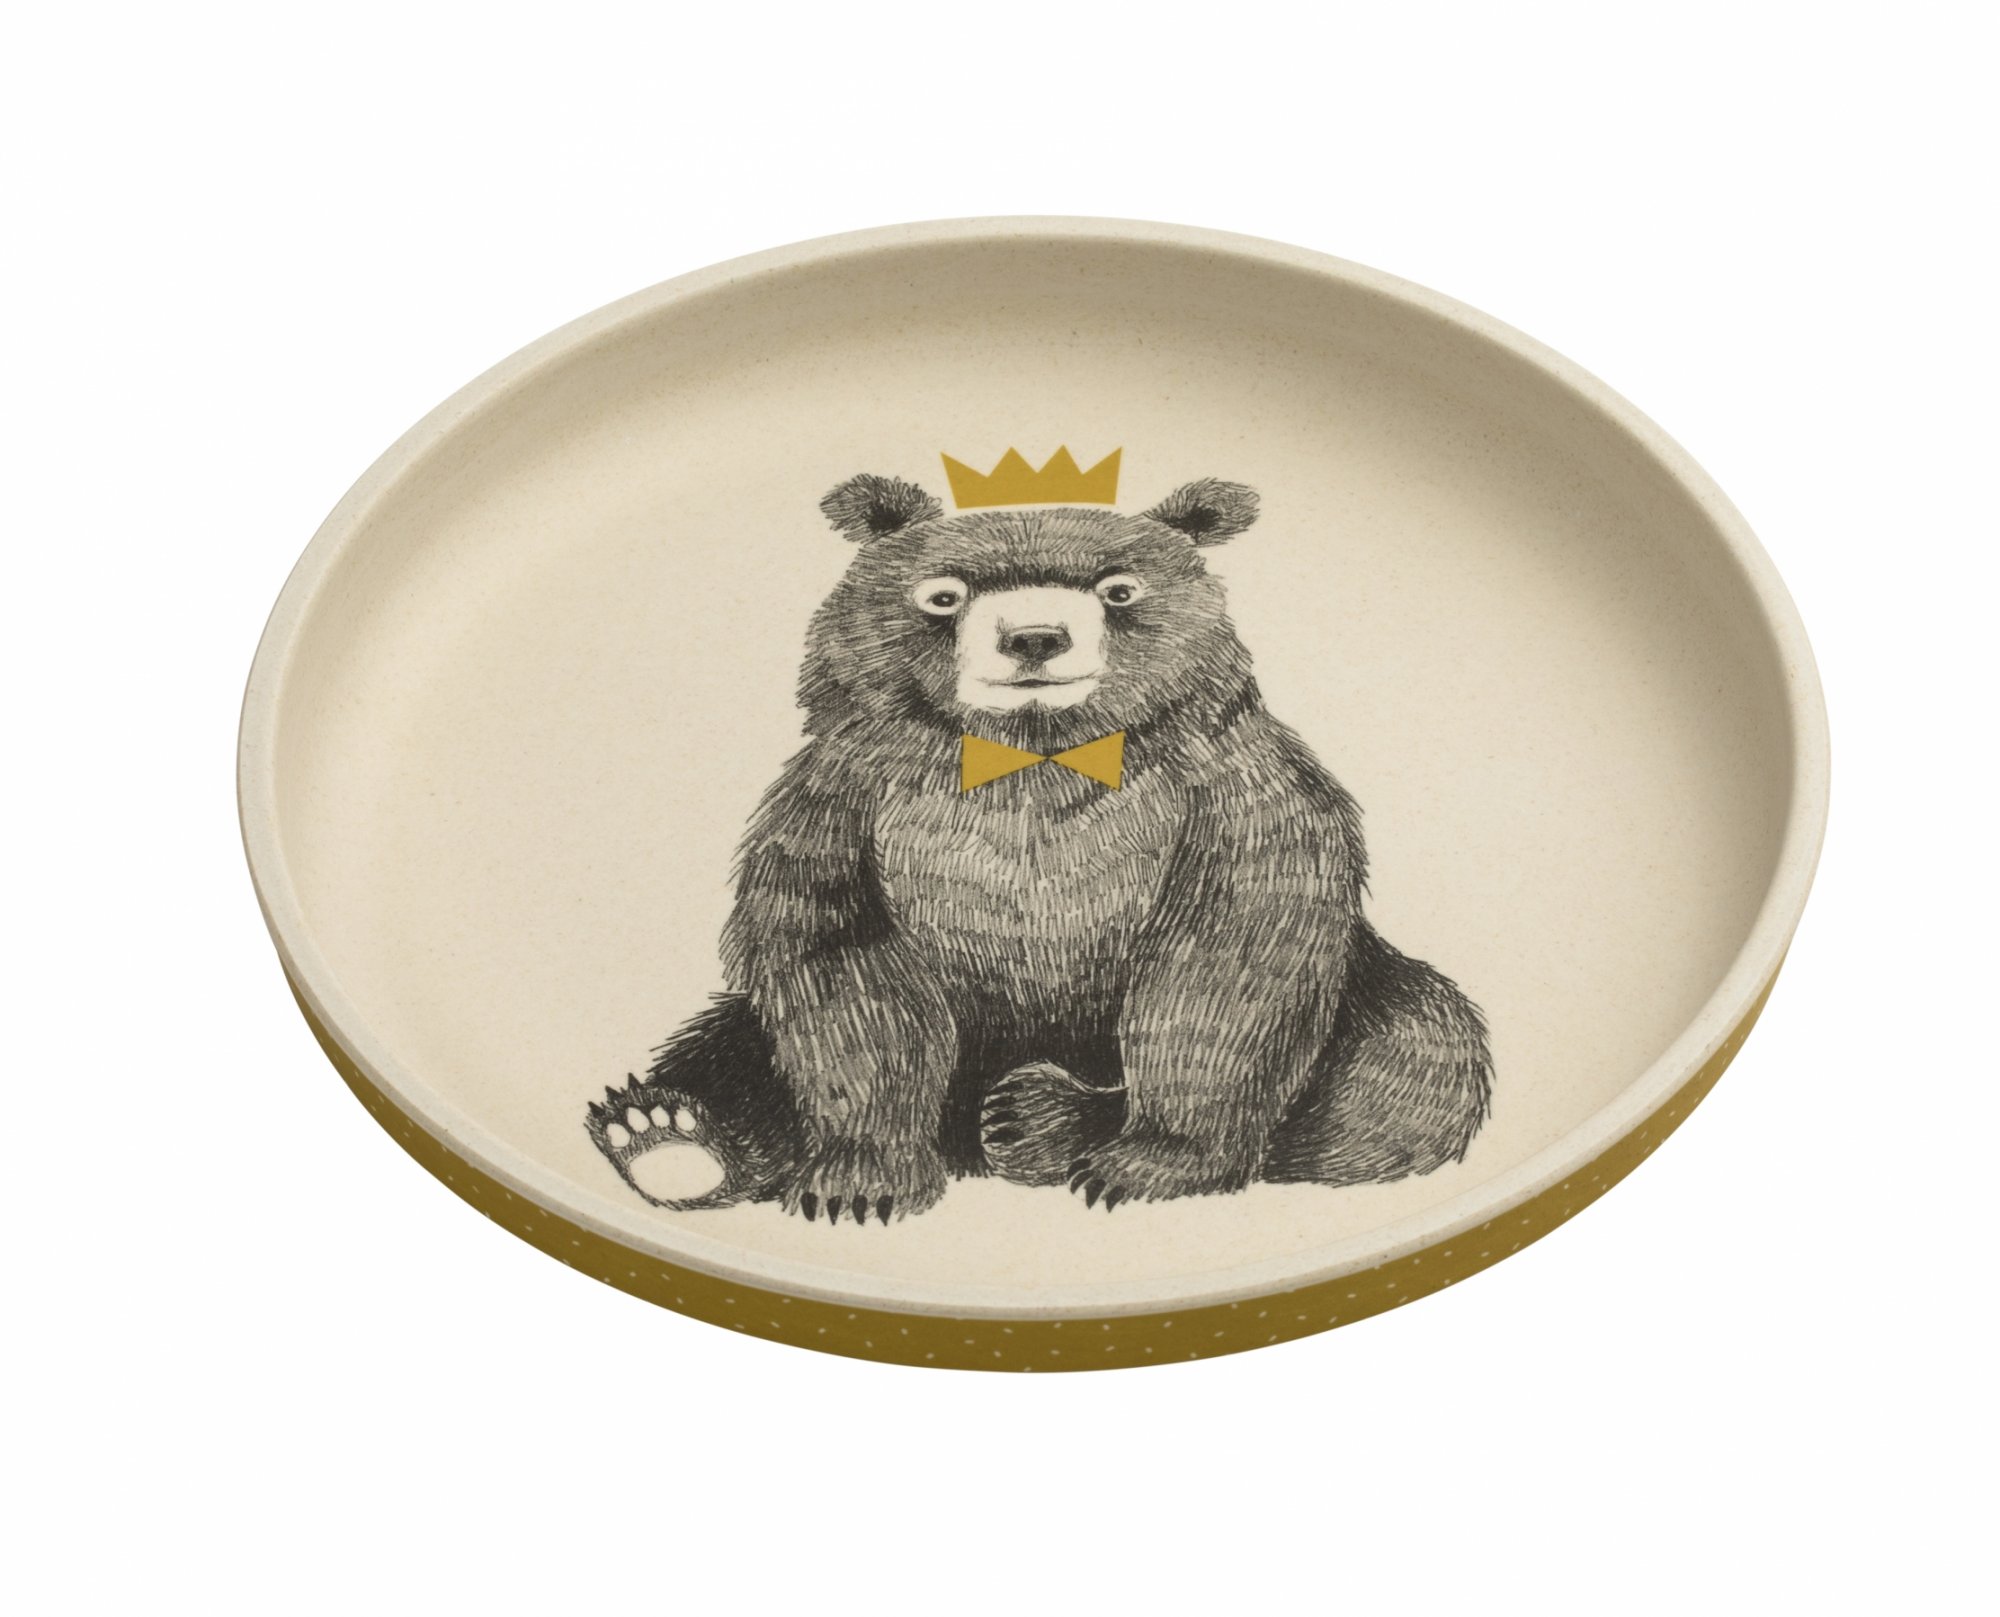 plates with desin of a bear with a crown